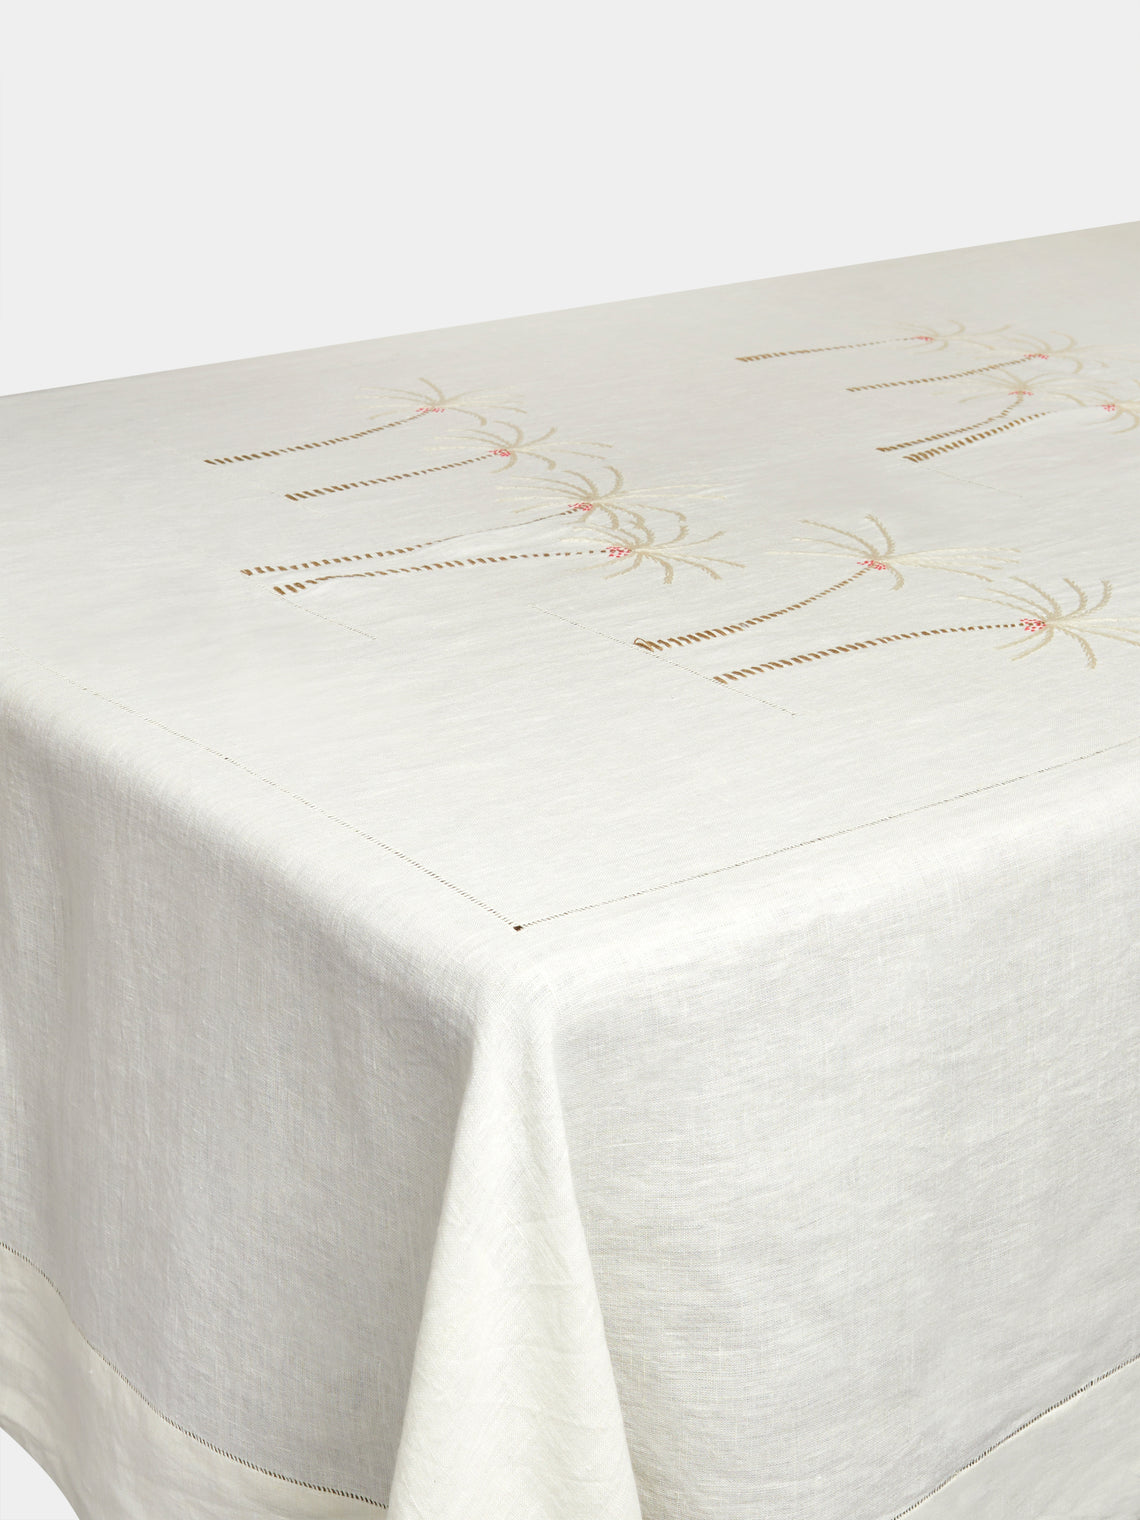 Malaika - Palm Tree Embroidered Linen Tablecloth - Red - ABASK